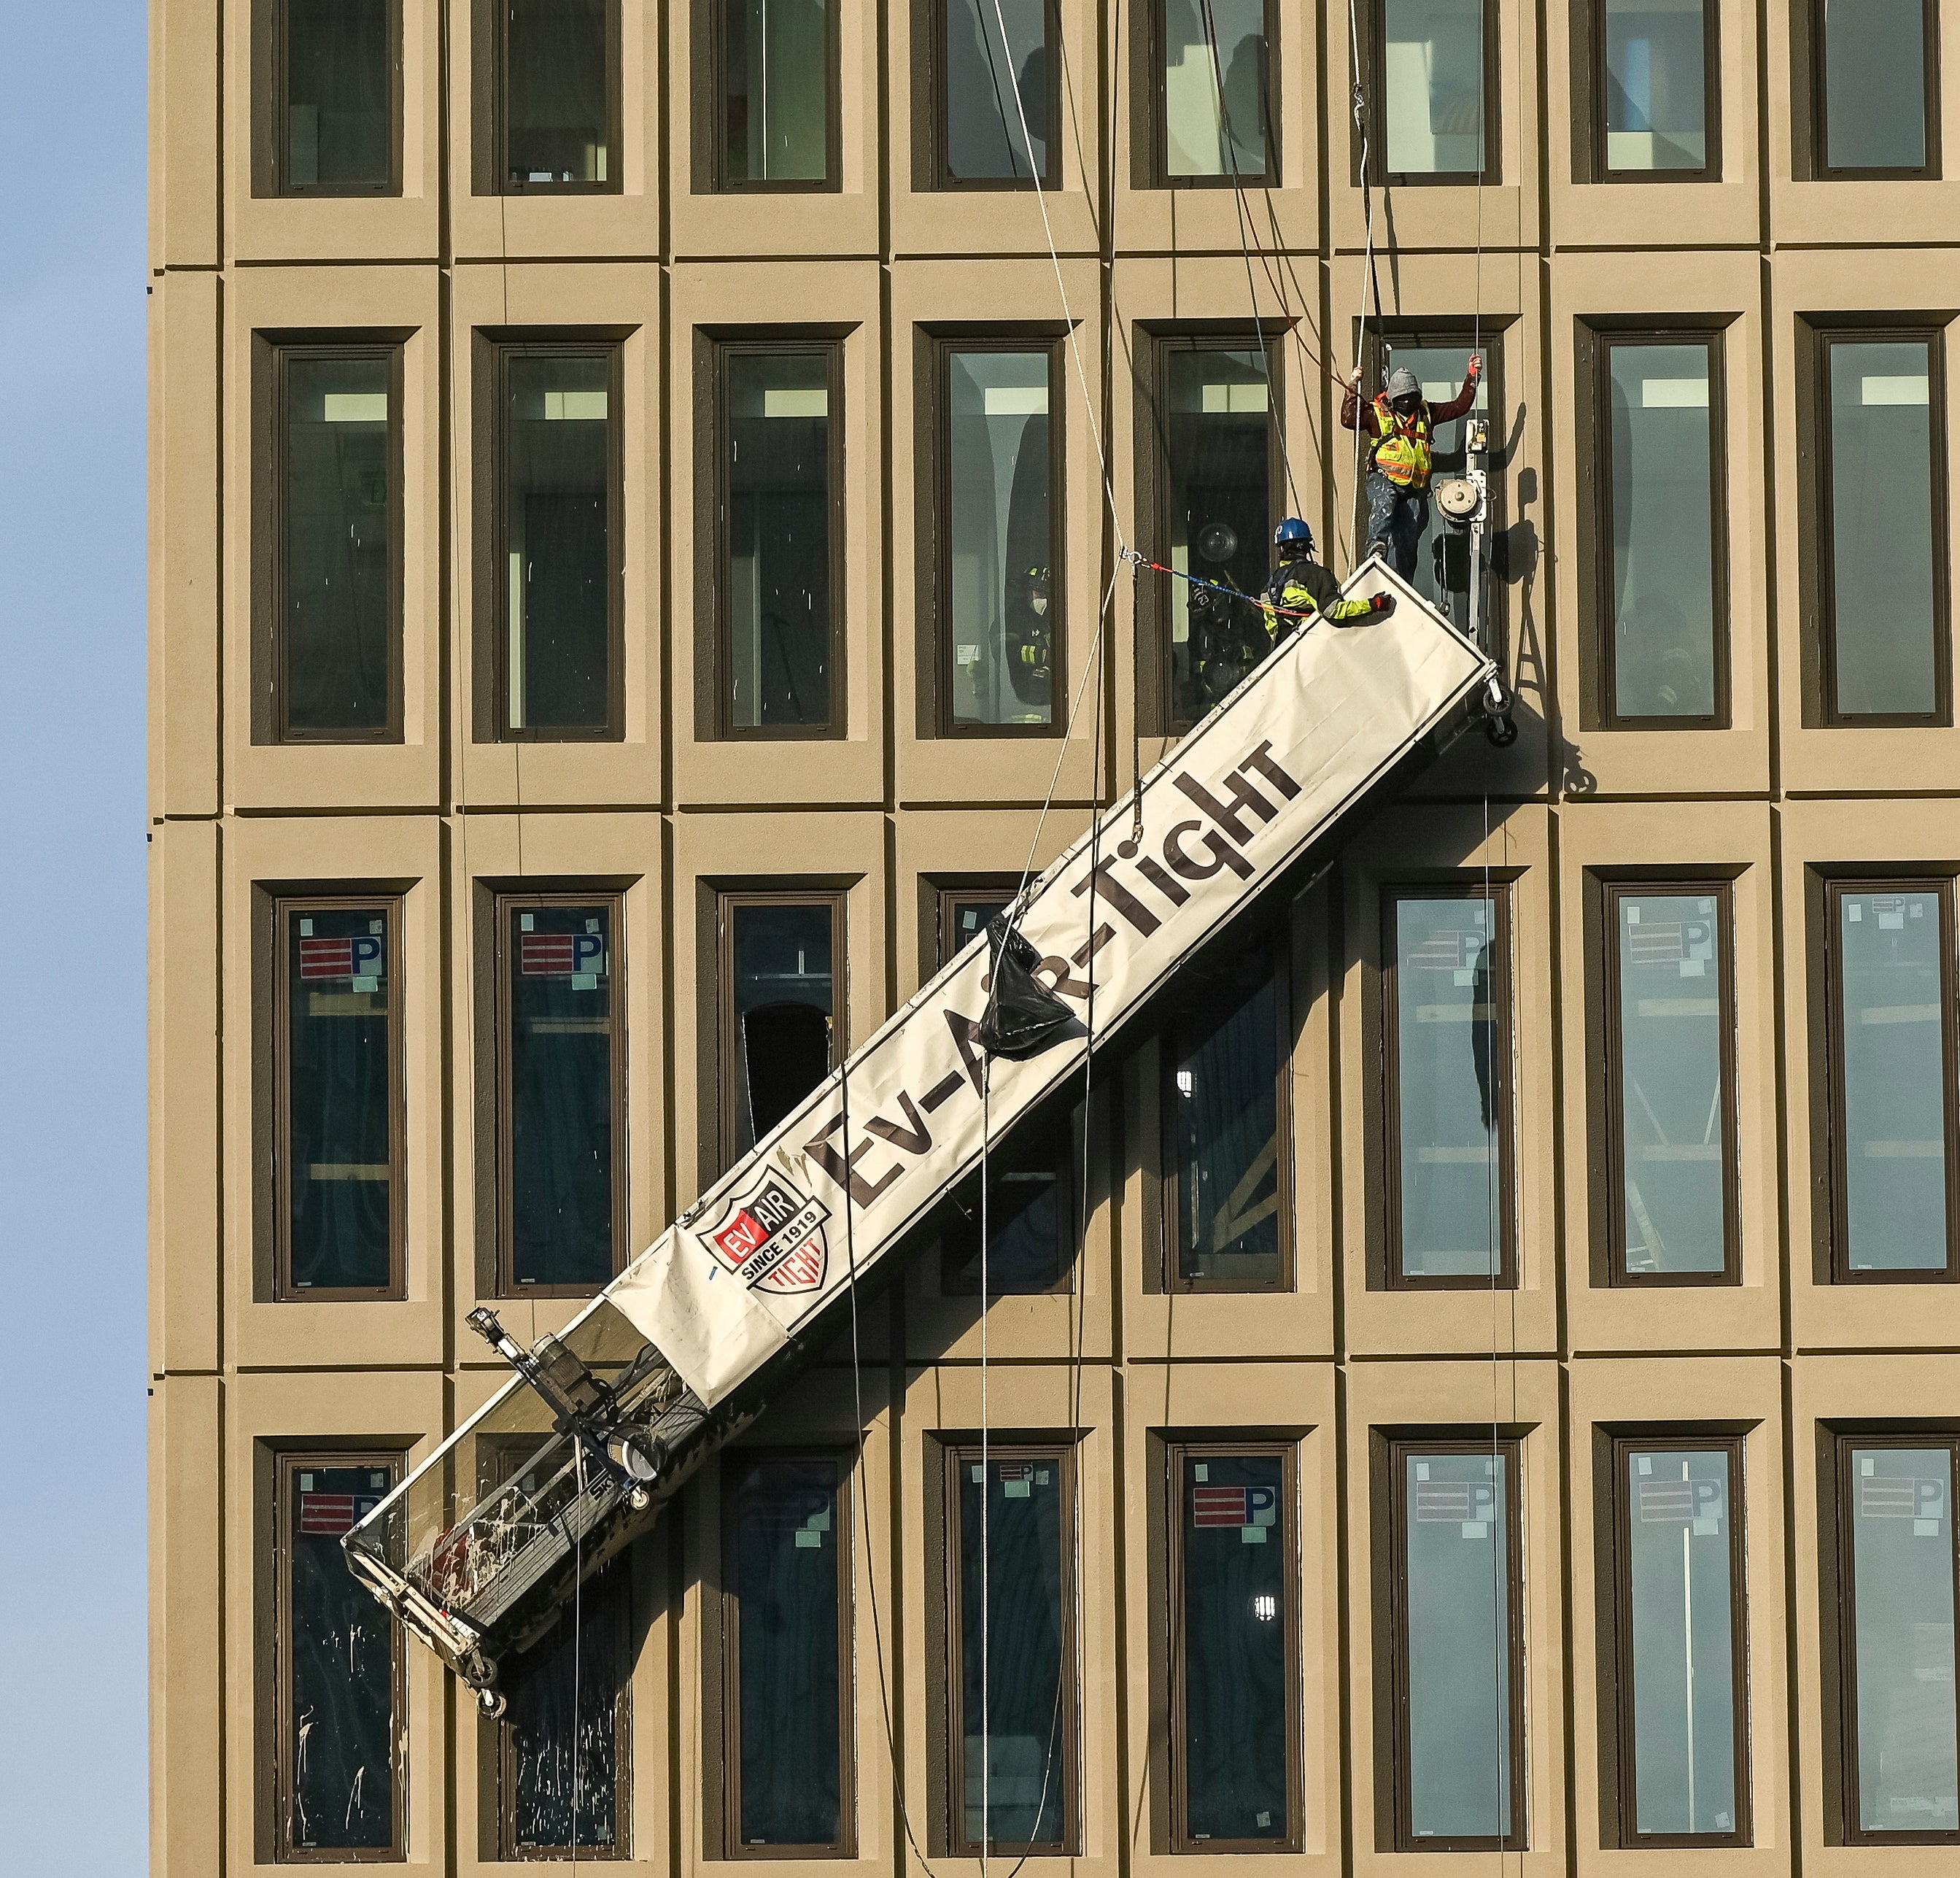 A worker stands on the end of a dangling scaffold as he waits to be rescued following an explosion at Baltimore Gas and Electric's offices, Wednesday, Dec. 23, 2020. Twenty-one of the victims were brought to area hospitals following the explosion with a partial roof collapse. The city’s fire department tweeted that at least nine of the victims were in critical condition, while another was in serious condition. (Jerry Jackson/The Baltimore Sun via AP)